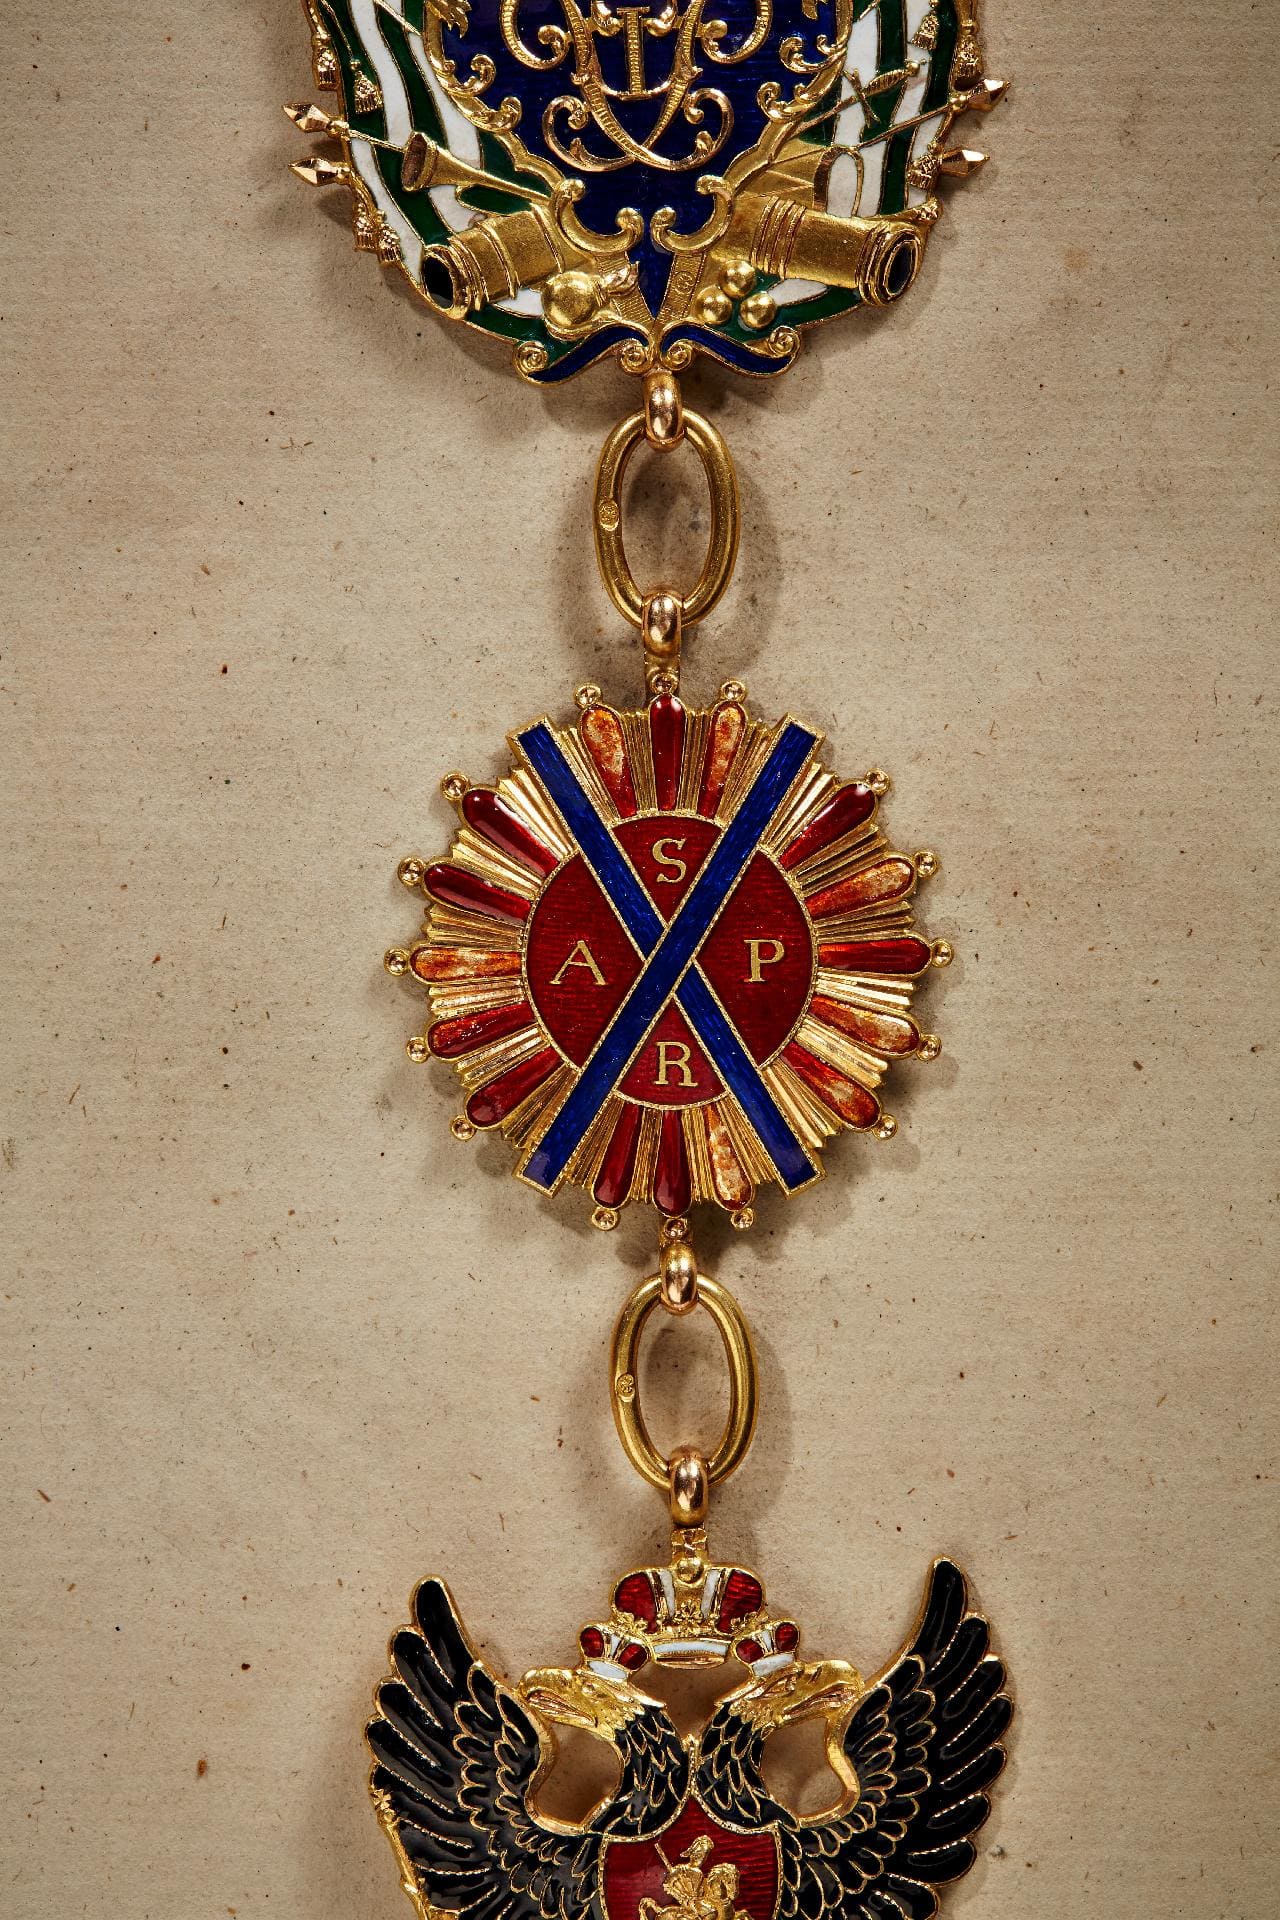 Order of Saint Andrew  Collar with 23 links made by Immanuel Pannasch in 1831.jpg